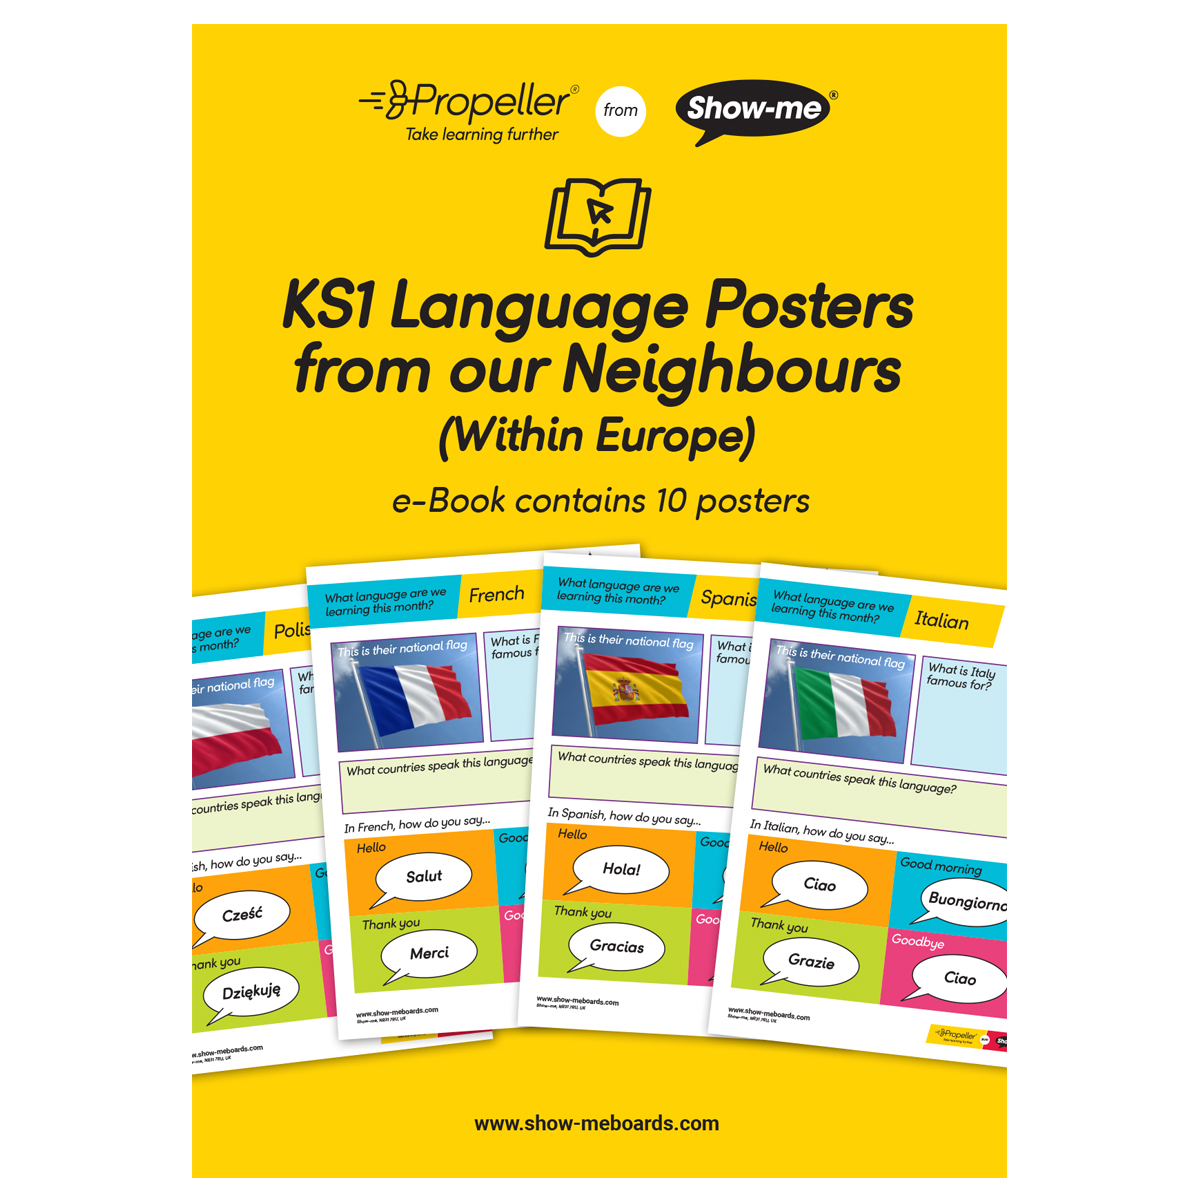 KS1 Language Posters from our Neighbours – Download